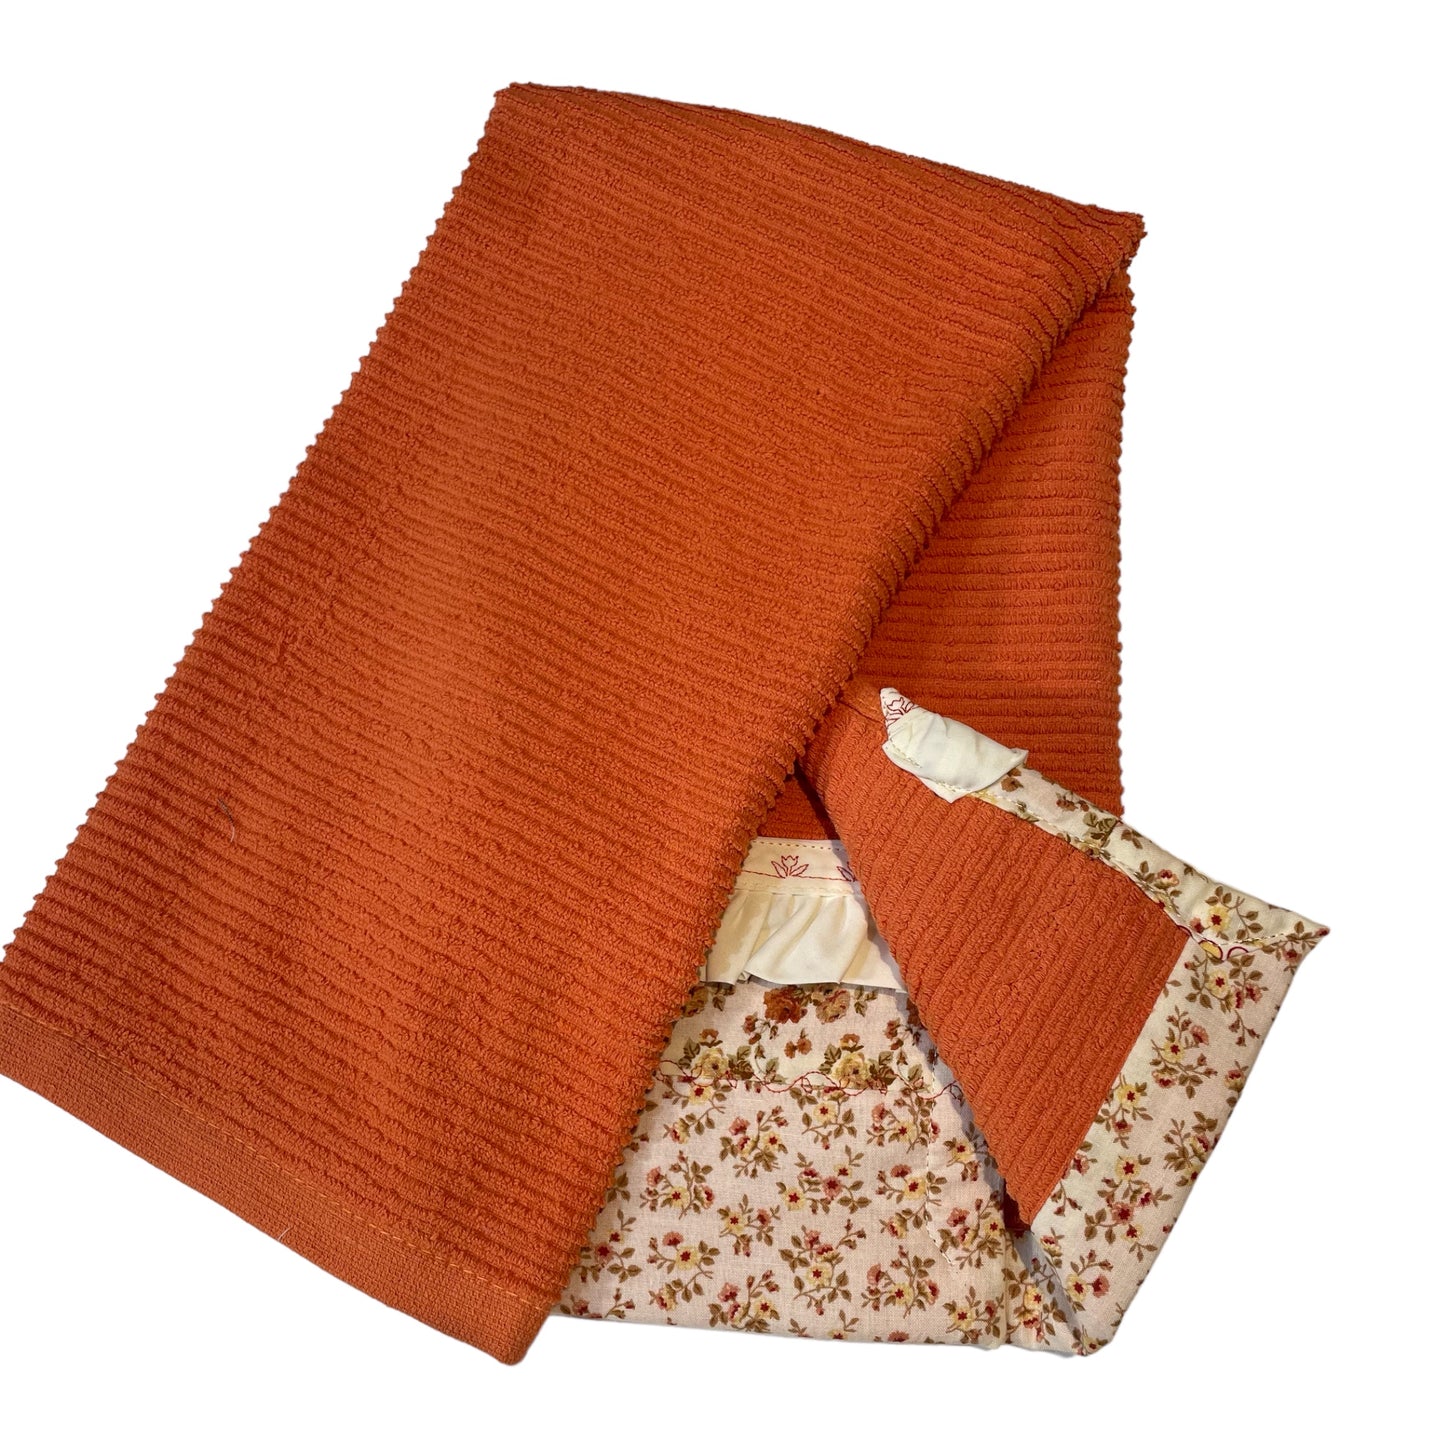 Orange and Cream Floral Kitchen Dish Towel with Handcrafted Accents